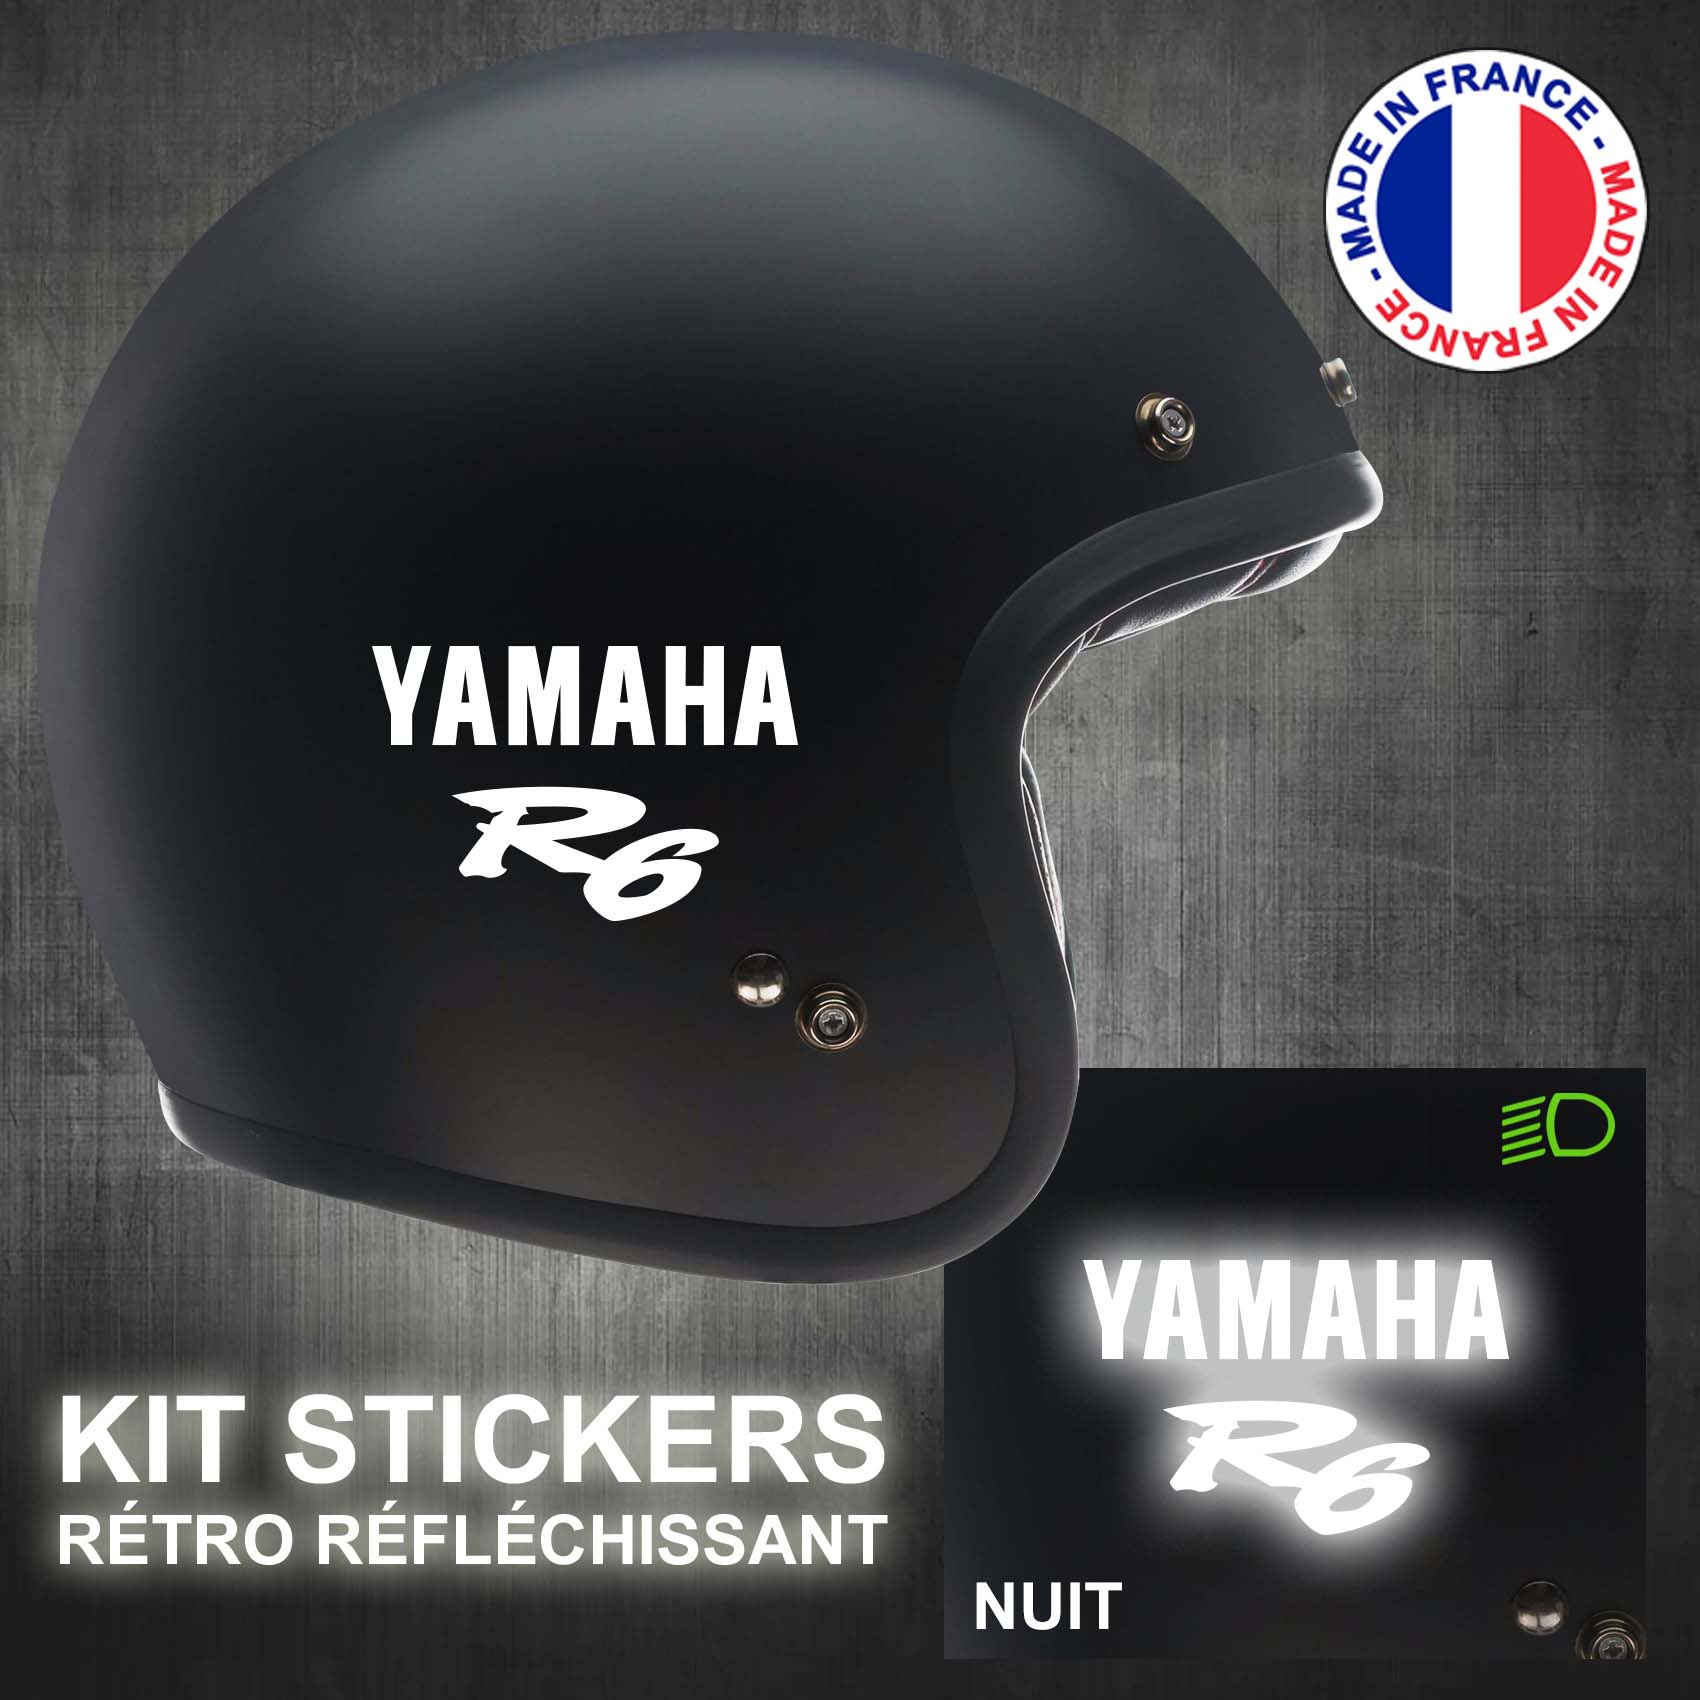 stickers-casque-moto-yamaha-r6-ref1-retro-reflechissant-autocollant-noir-moto-velo-tuning-racing-route-sticker-casques-adhesif-scooter-nuit-securite-decals-personnalise-personnalisable-min